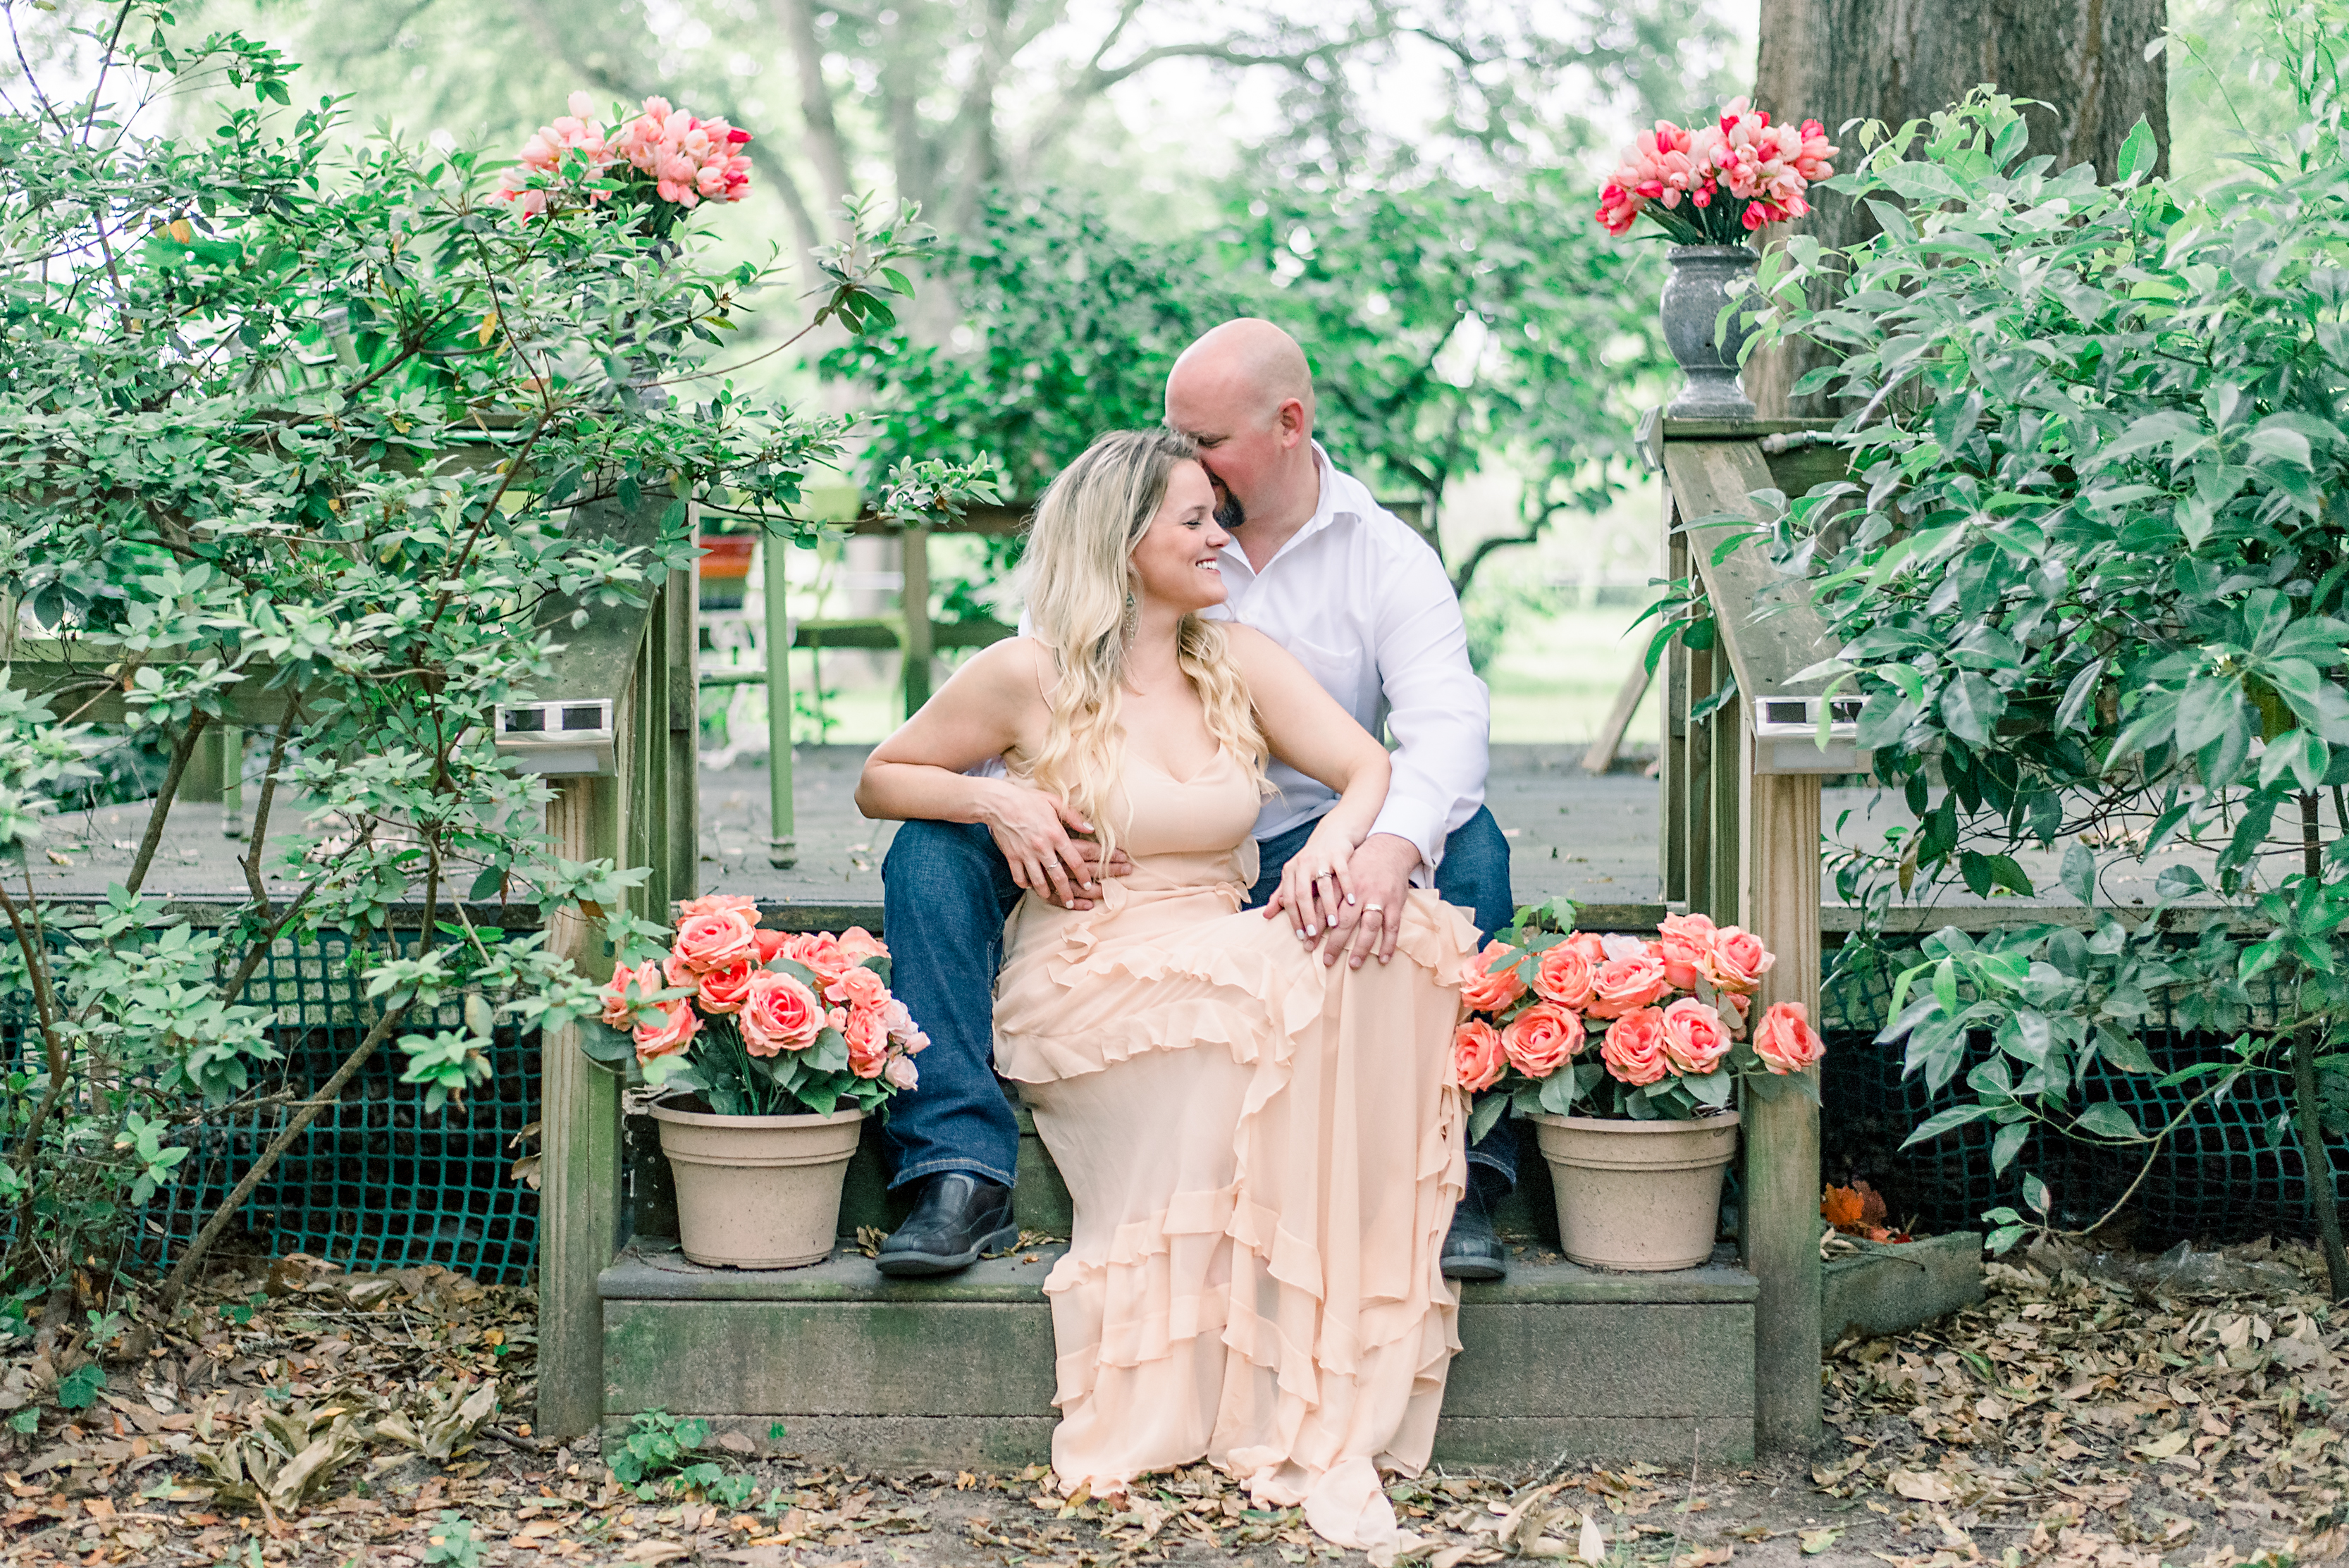 Dreamy Backyard Engagement | Jessica Lucile Photography